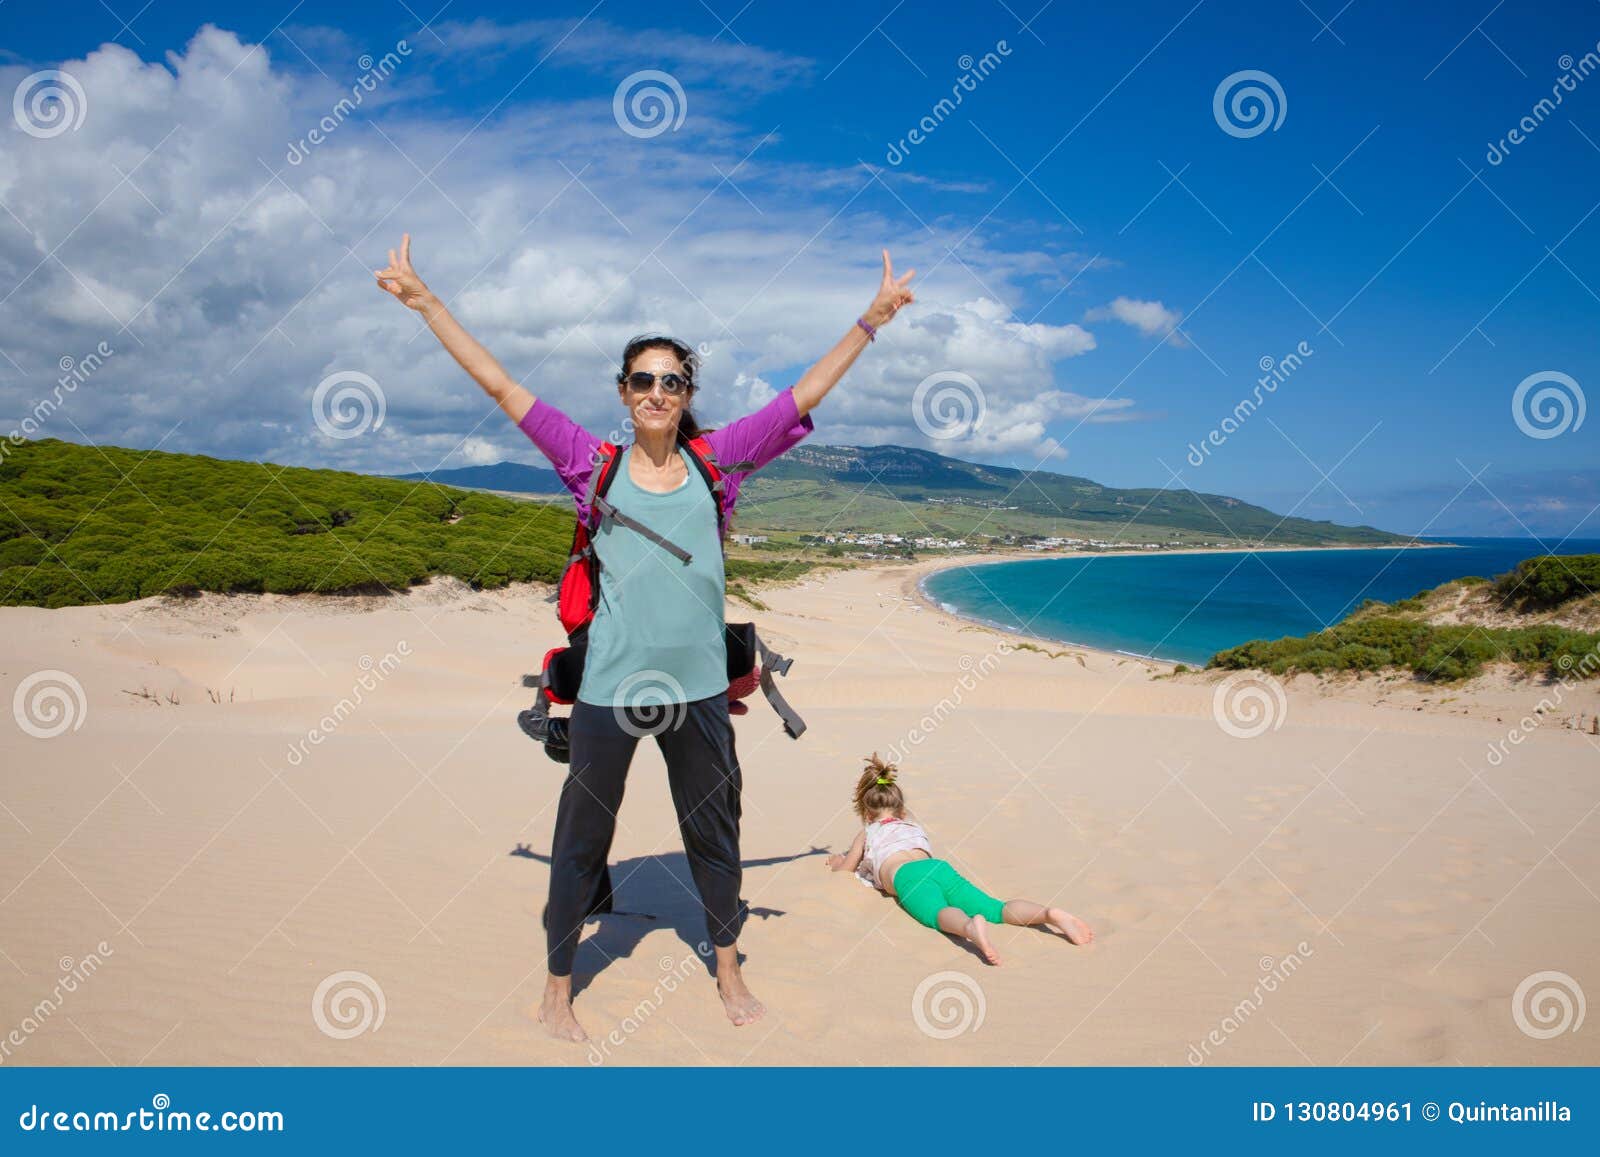 woman and girl on top of the dune of bolonia beach in cadiz